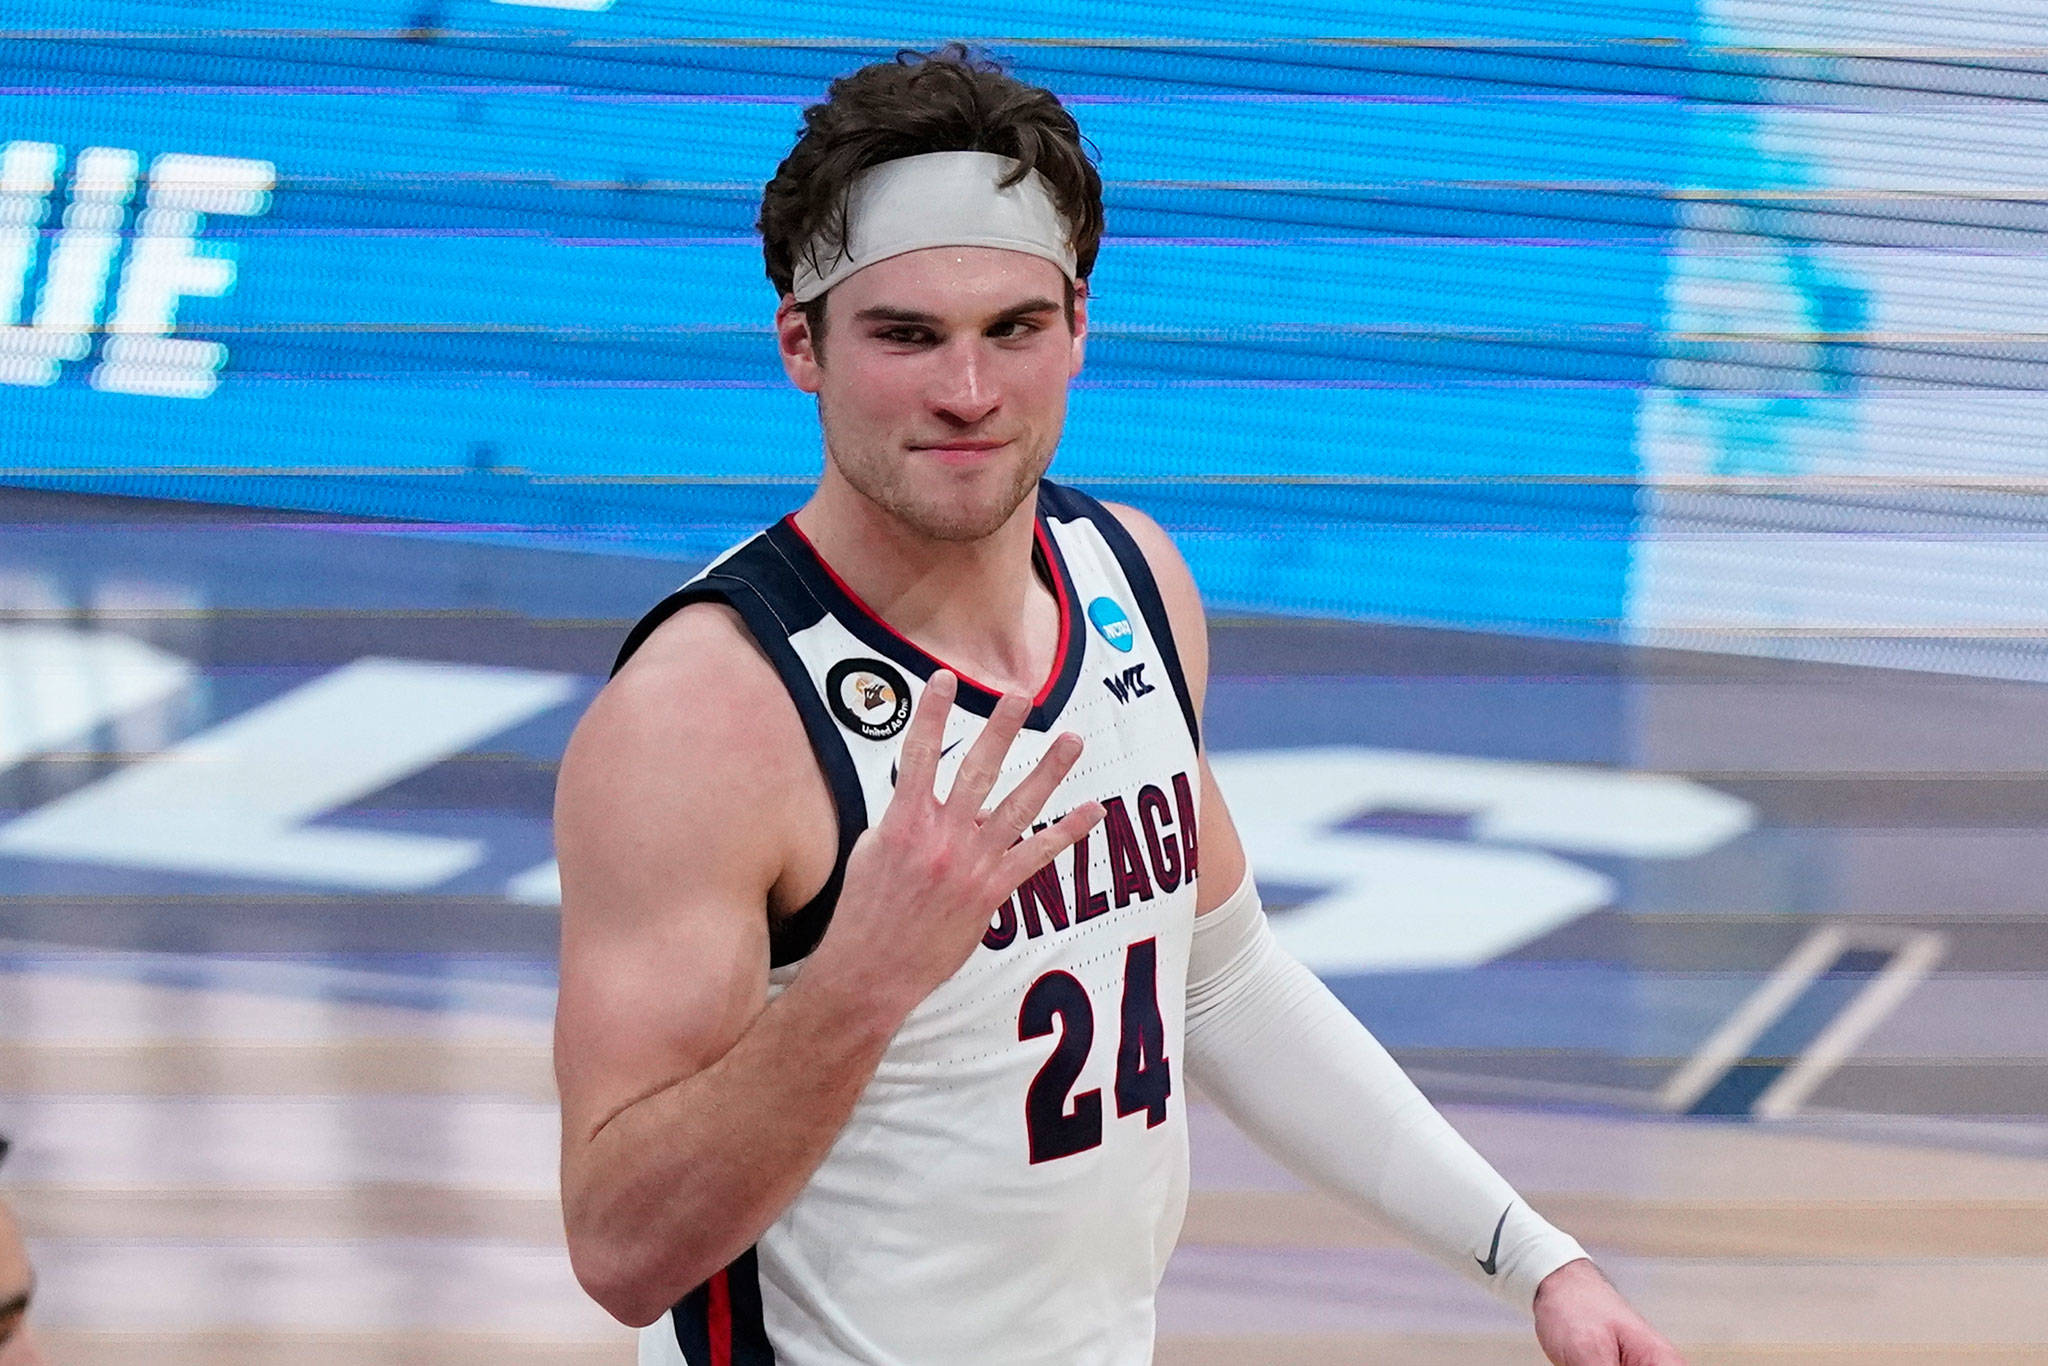 Gonzaga forward Corey Kispert, an Edmonds native, hold up four fingers after beating USC 85-66 in the Elite Eight of the men’s college basketball tournament on Tuesday at Lucas Oil Stadium in Indianapolis. (AP Photo/Michael Conroy)